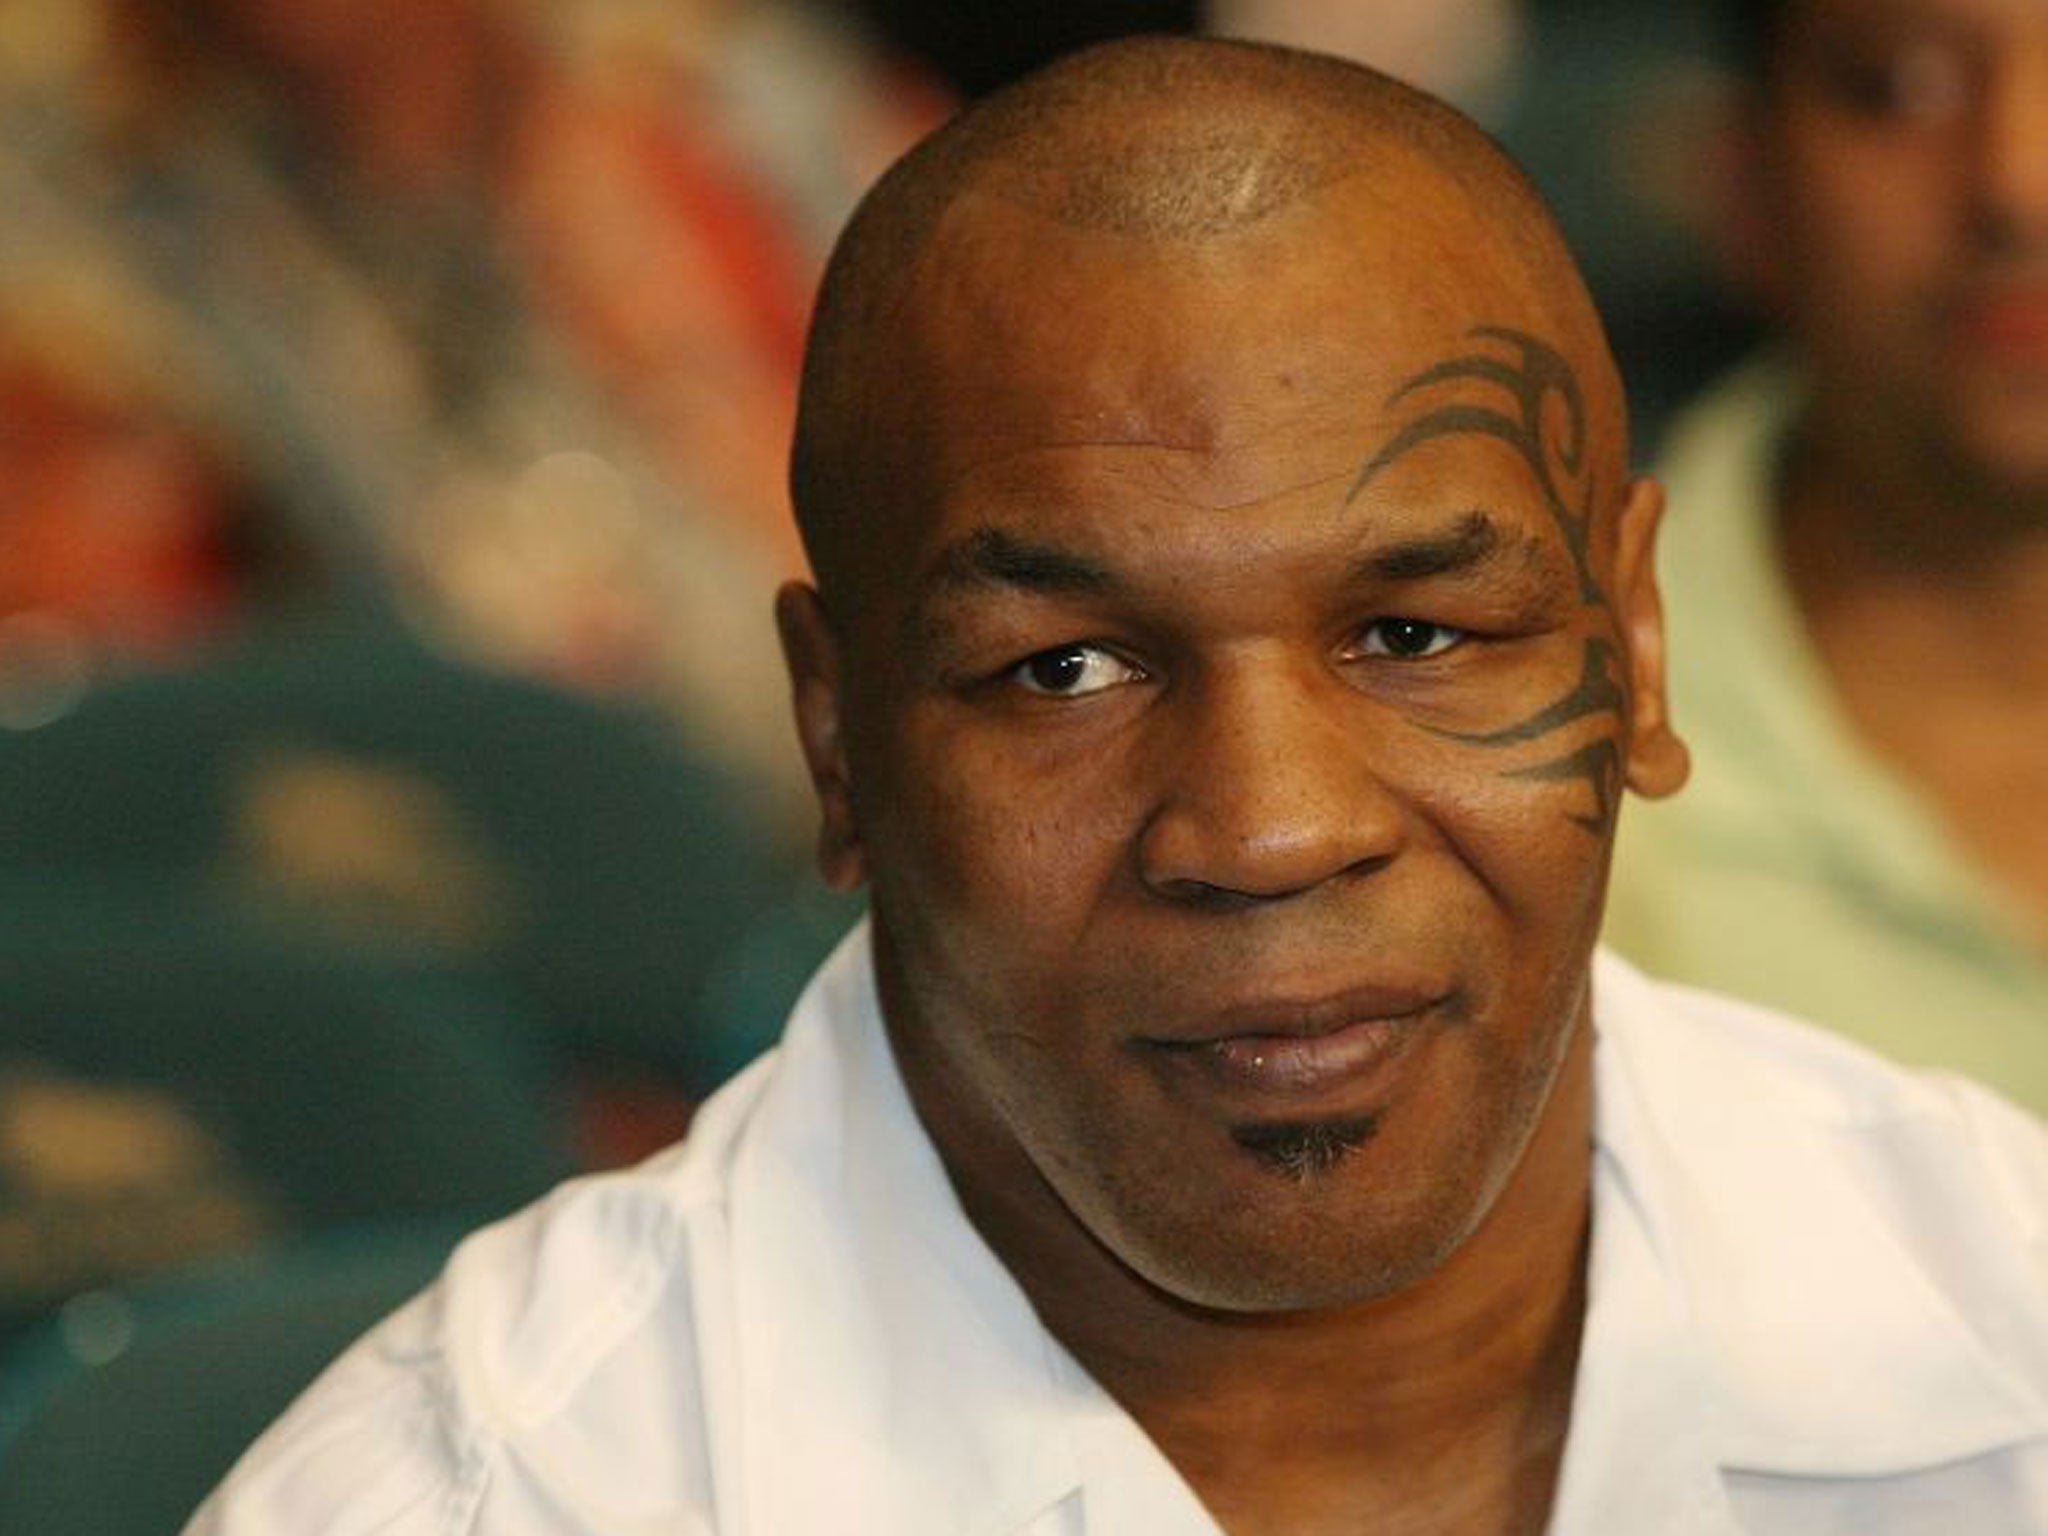 Mike Tyson has led an appalling and sad life, but are we not a country that gives second chances?